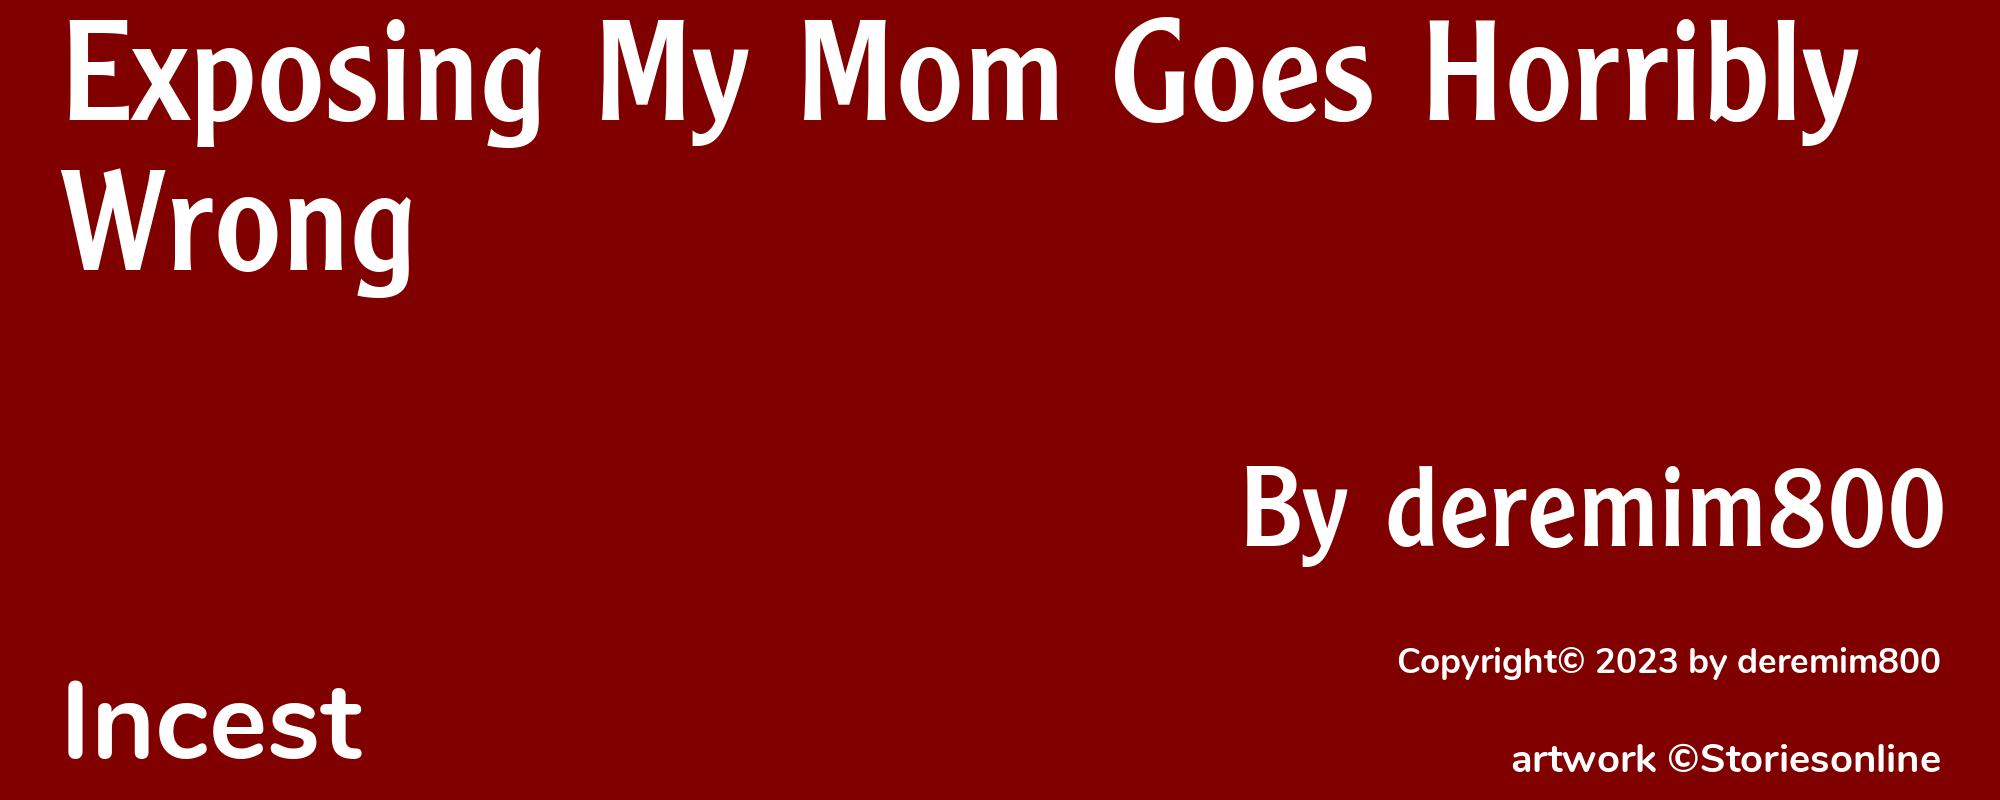 Exposing My Mom Goes Horribly Wrong - Cover